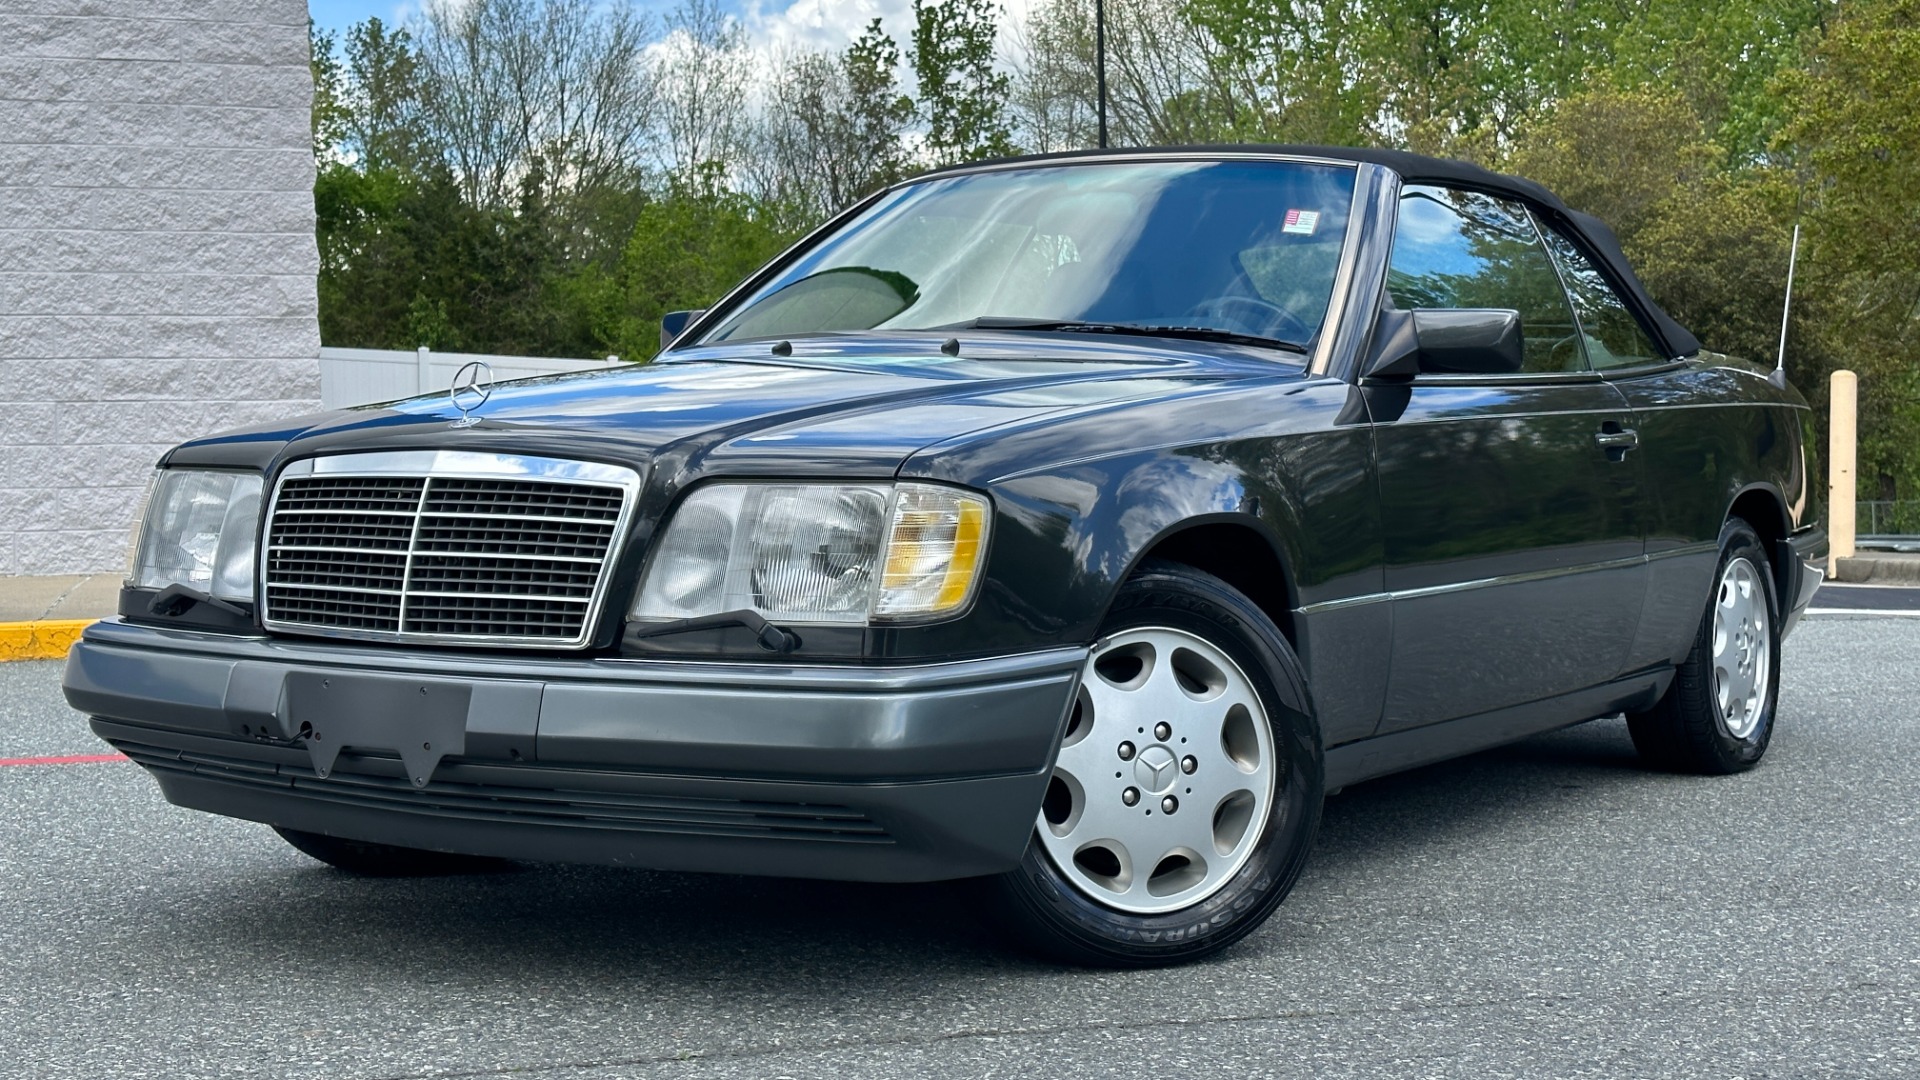 Used 1994 Mercedes-Benz 300 Series E 320 / CONVERTIBLE / MEMORY / POWER TOP / INLINE 6CYL / LEATHER for sale $17,000 at Formula Imports in Charlotte NC 28227 2